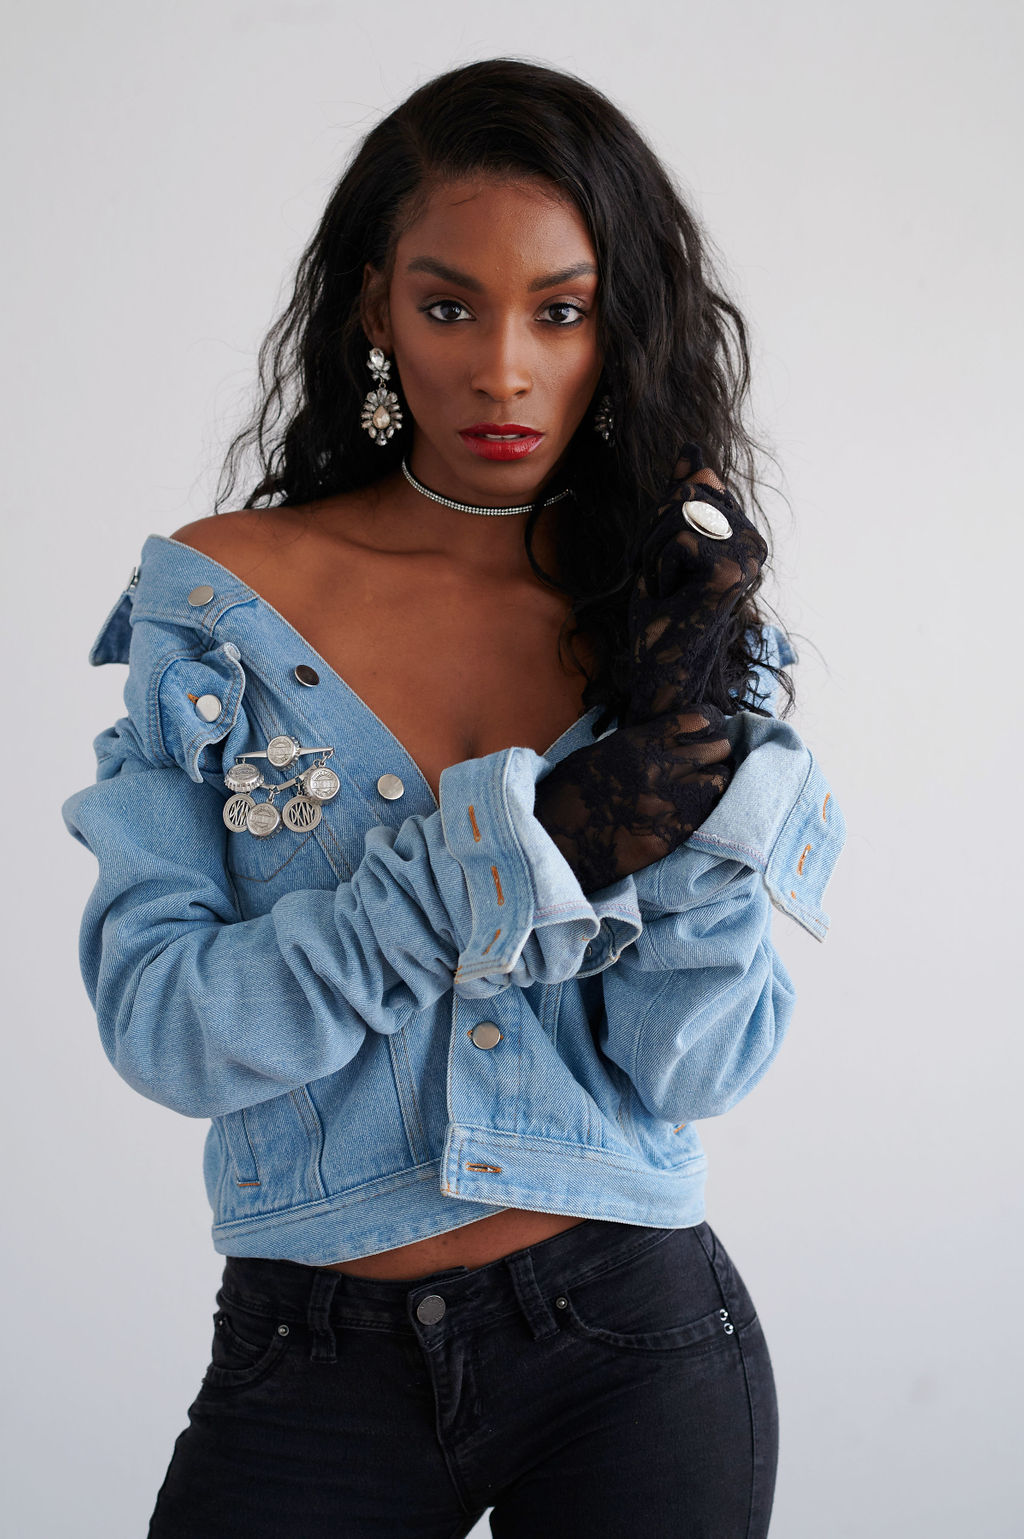 Annjulia Smalls In Y Project-styled by melissa-lcm-sheldon botler photography-denim jacket-elongated sleeves-high fashio